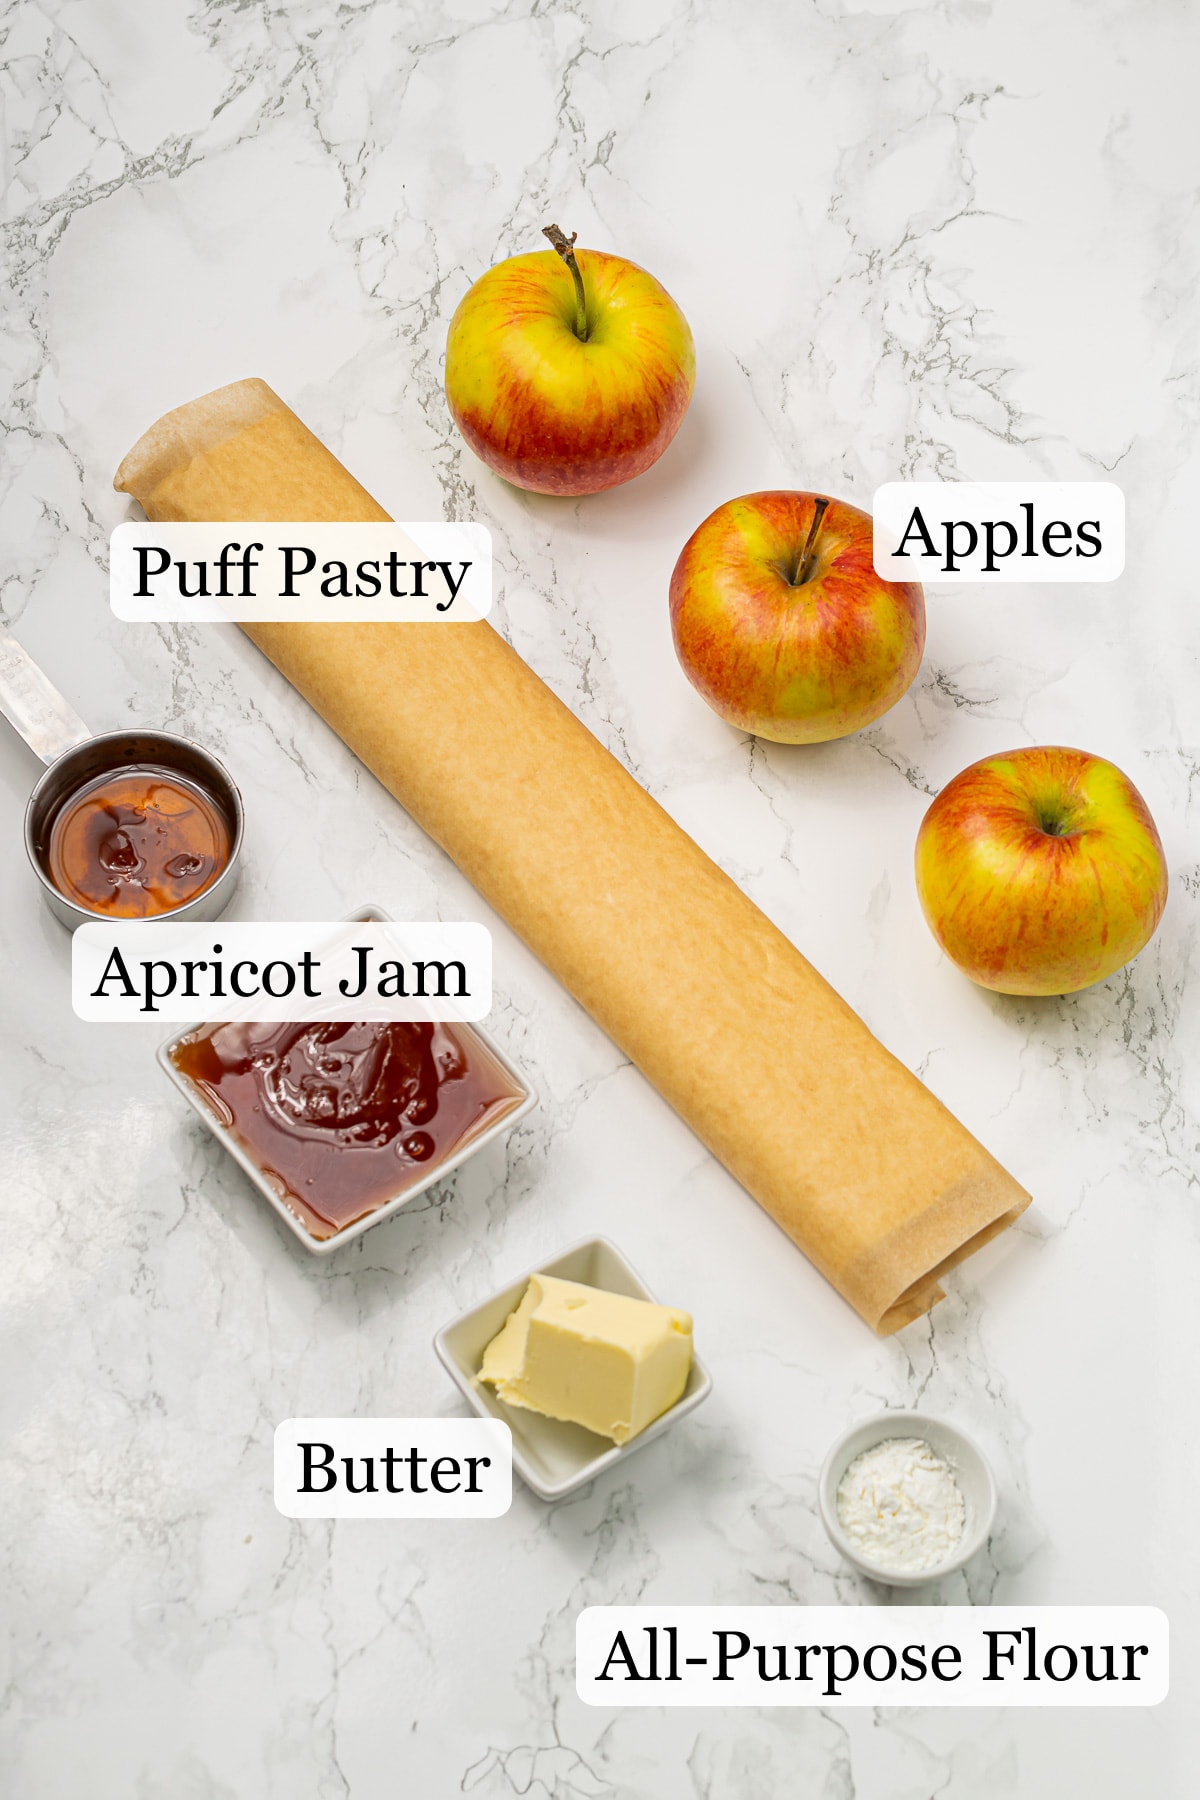 Ingredients for apple tart displayed on a marble countertop, including fresh apples, dough roll, butter, and apricot jam.